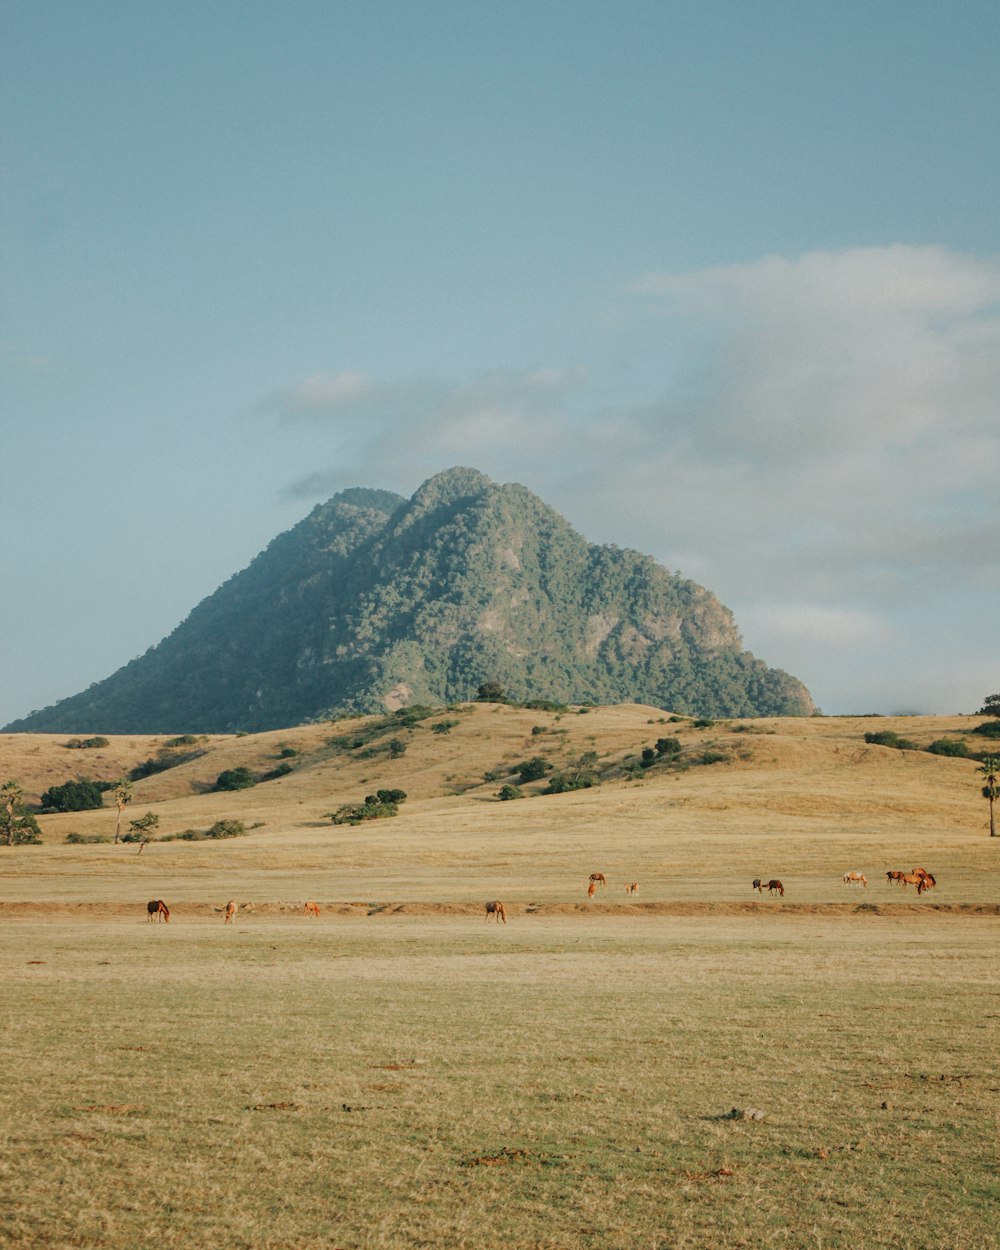 a group of horses grazing in a field with a mountain in the background